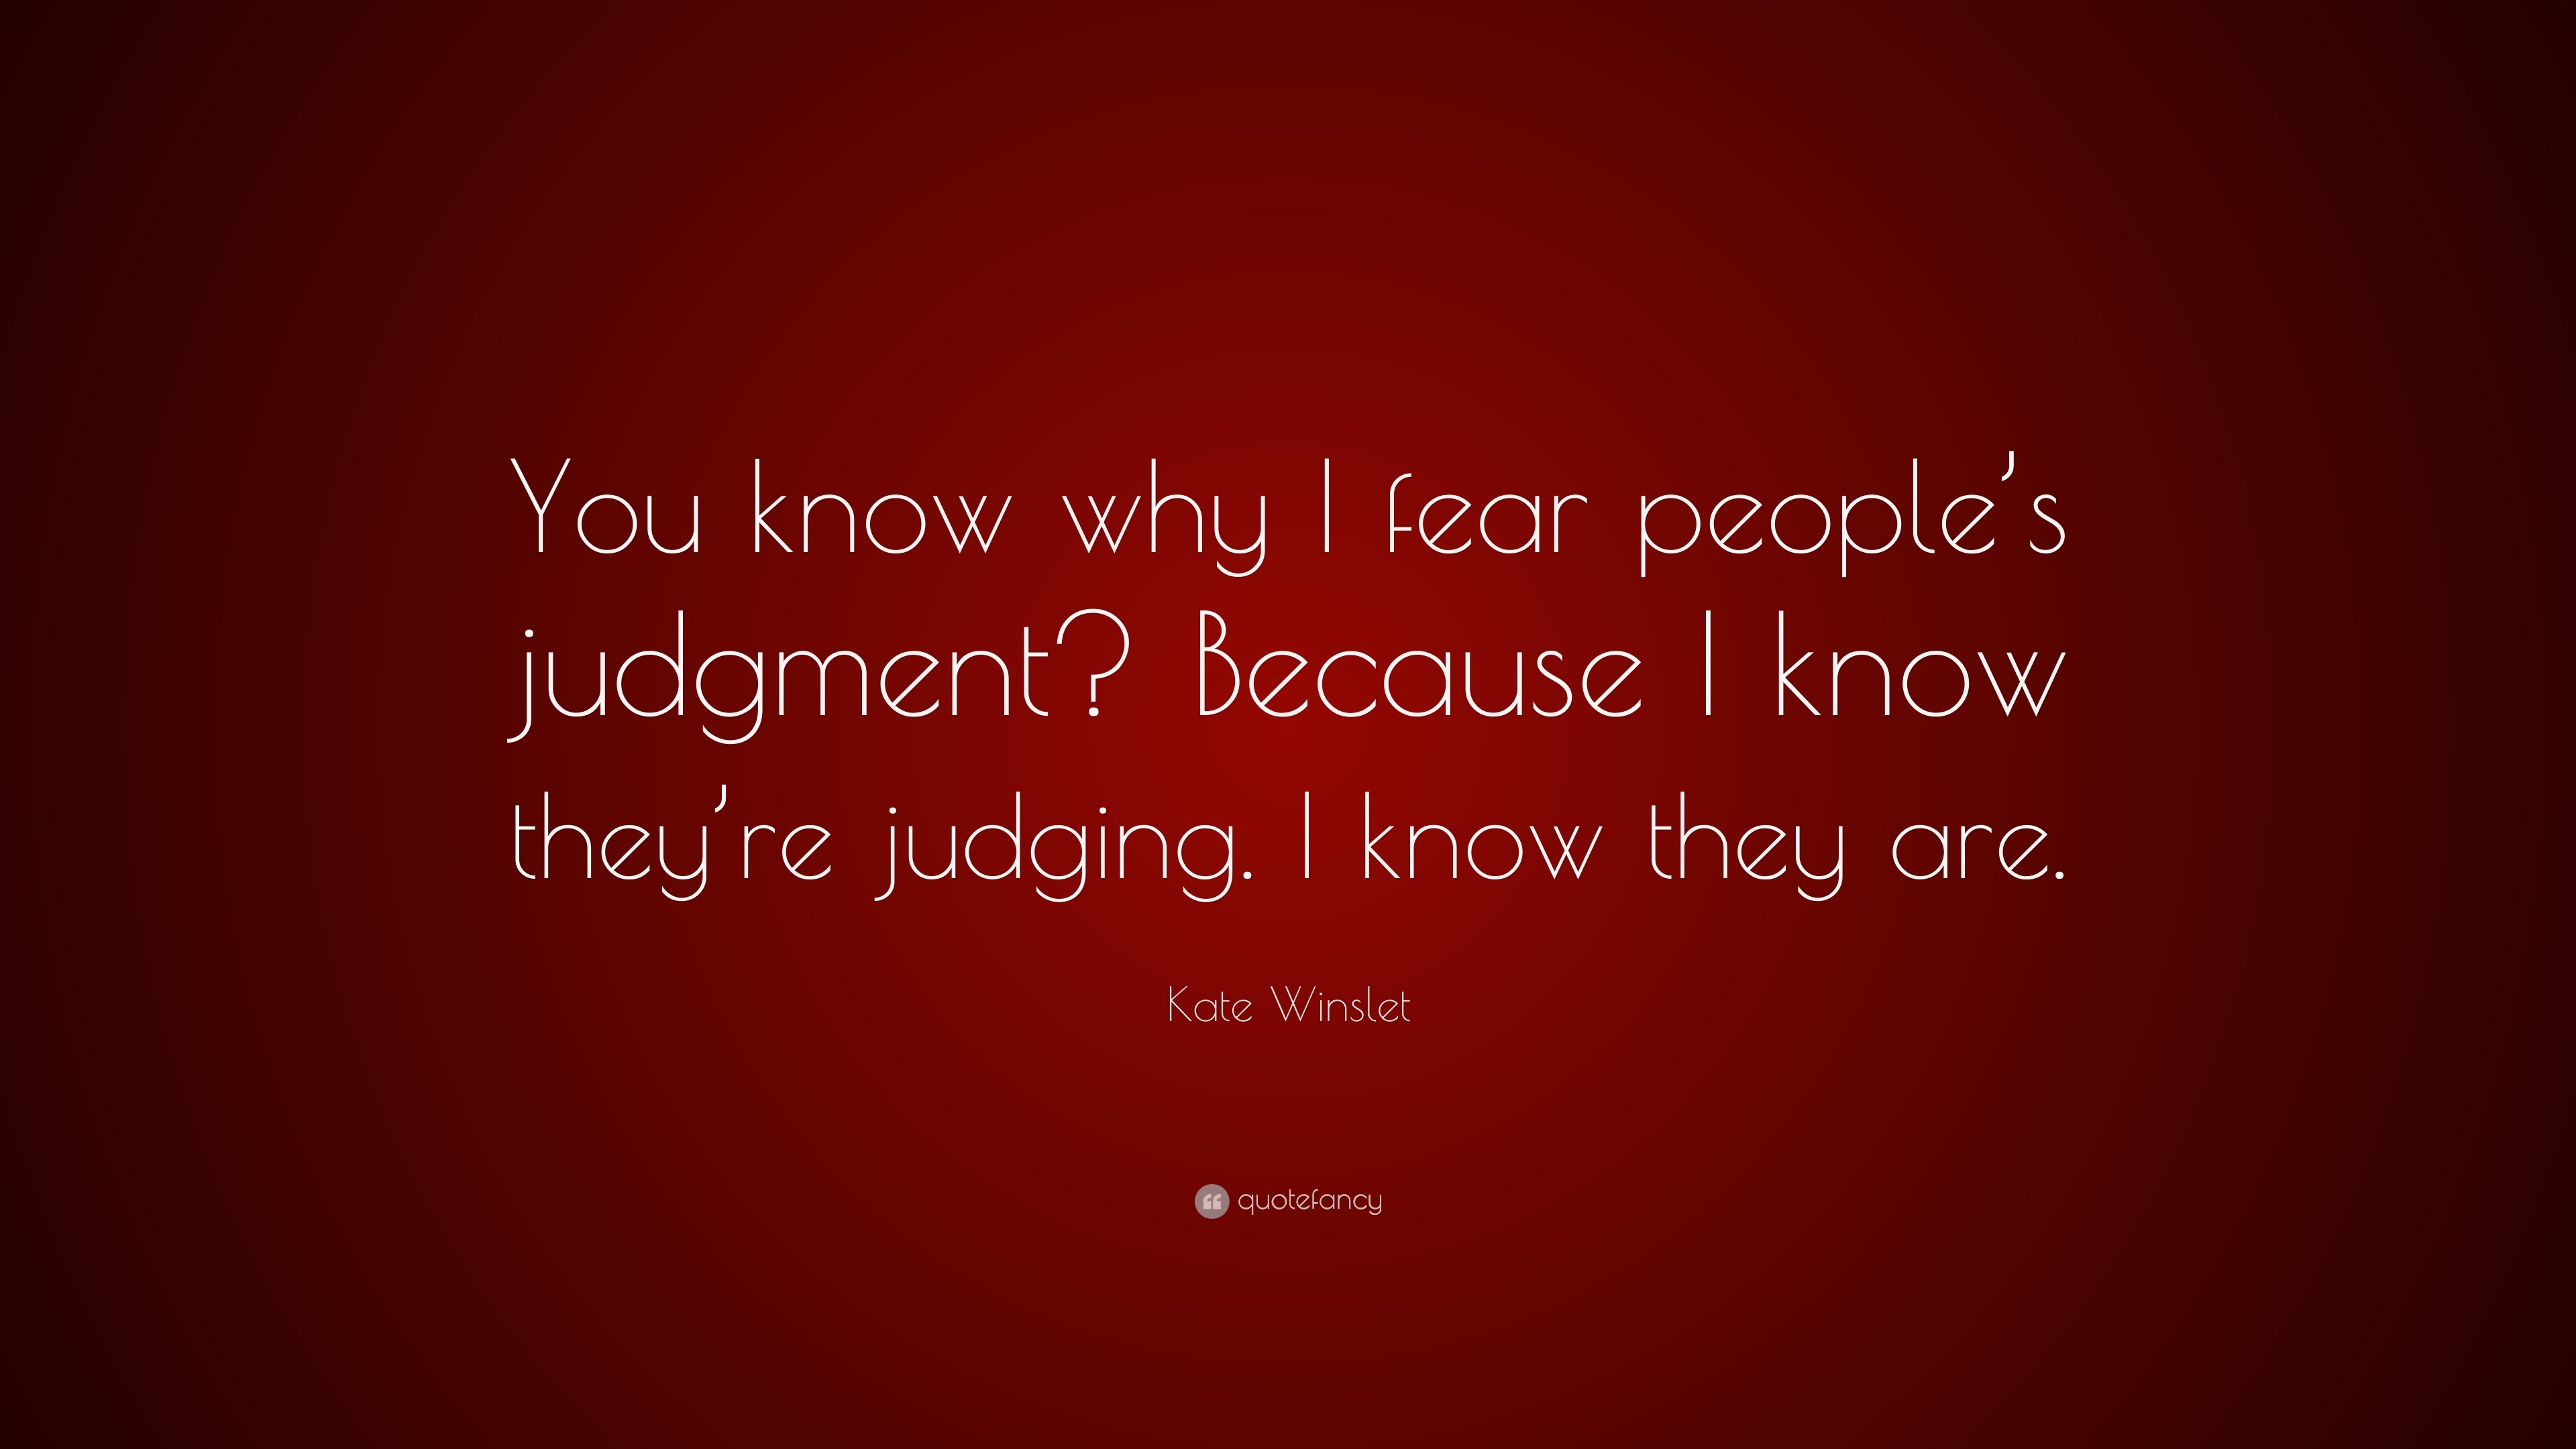 Kate Winslet Quote: “You know why I fear people’s judgment? Because I ...